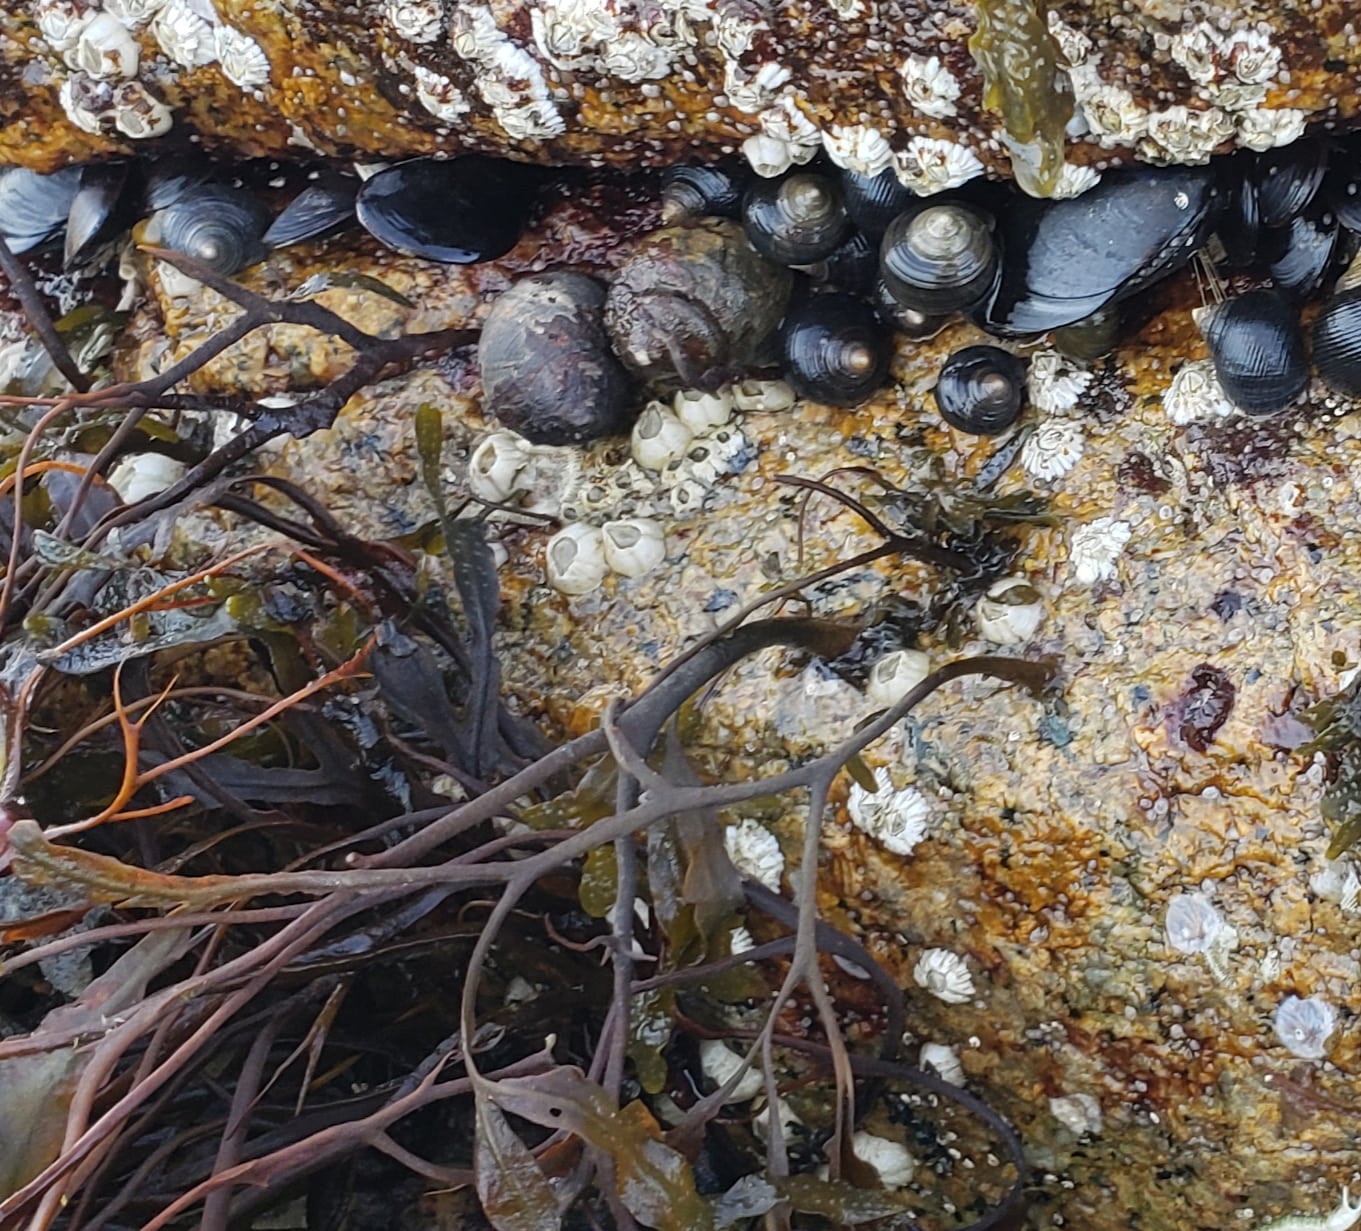 Snails, barnacles and blue mussels growing on a rock